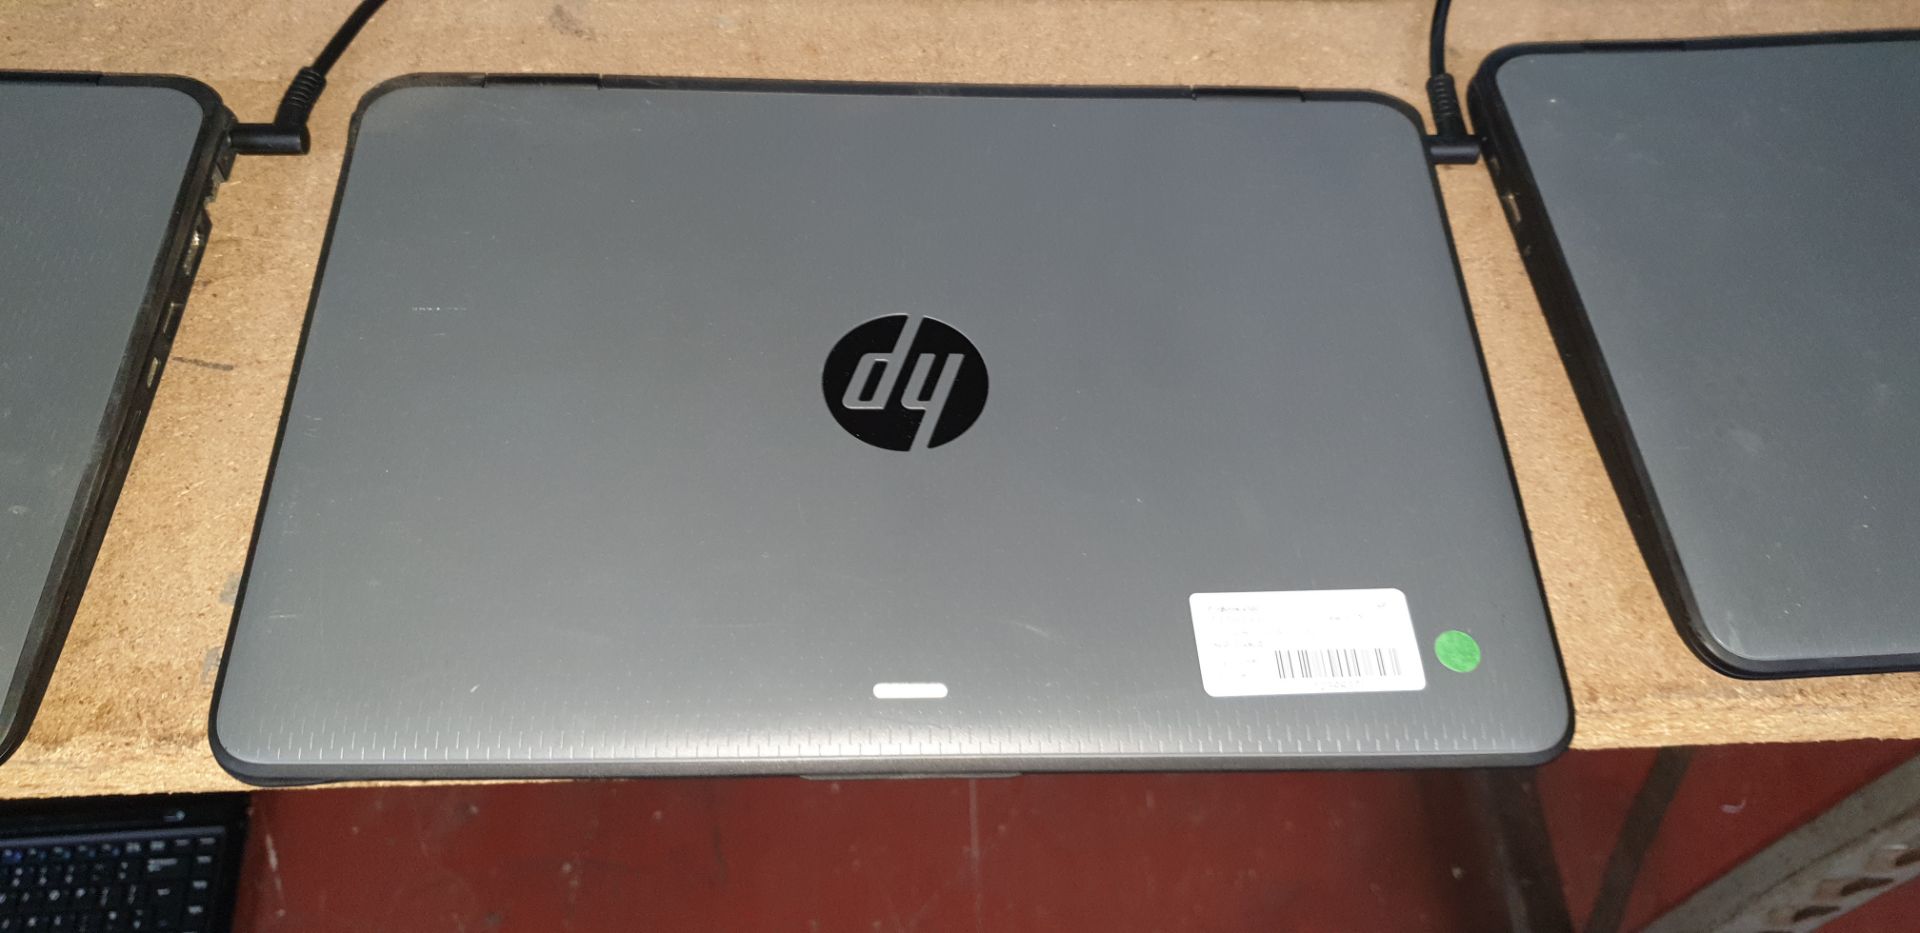 HP notebook ProBook x360 11 G1 EE, Celeron N3350 (1.10GHz), 4GB, 62.54GB, 11.5" Includes charger - Image 5 of 9